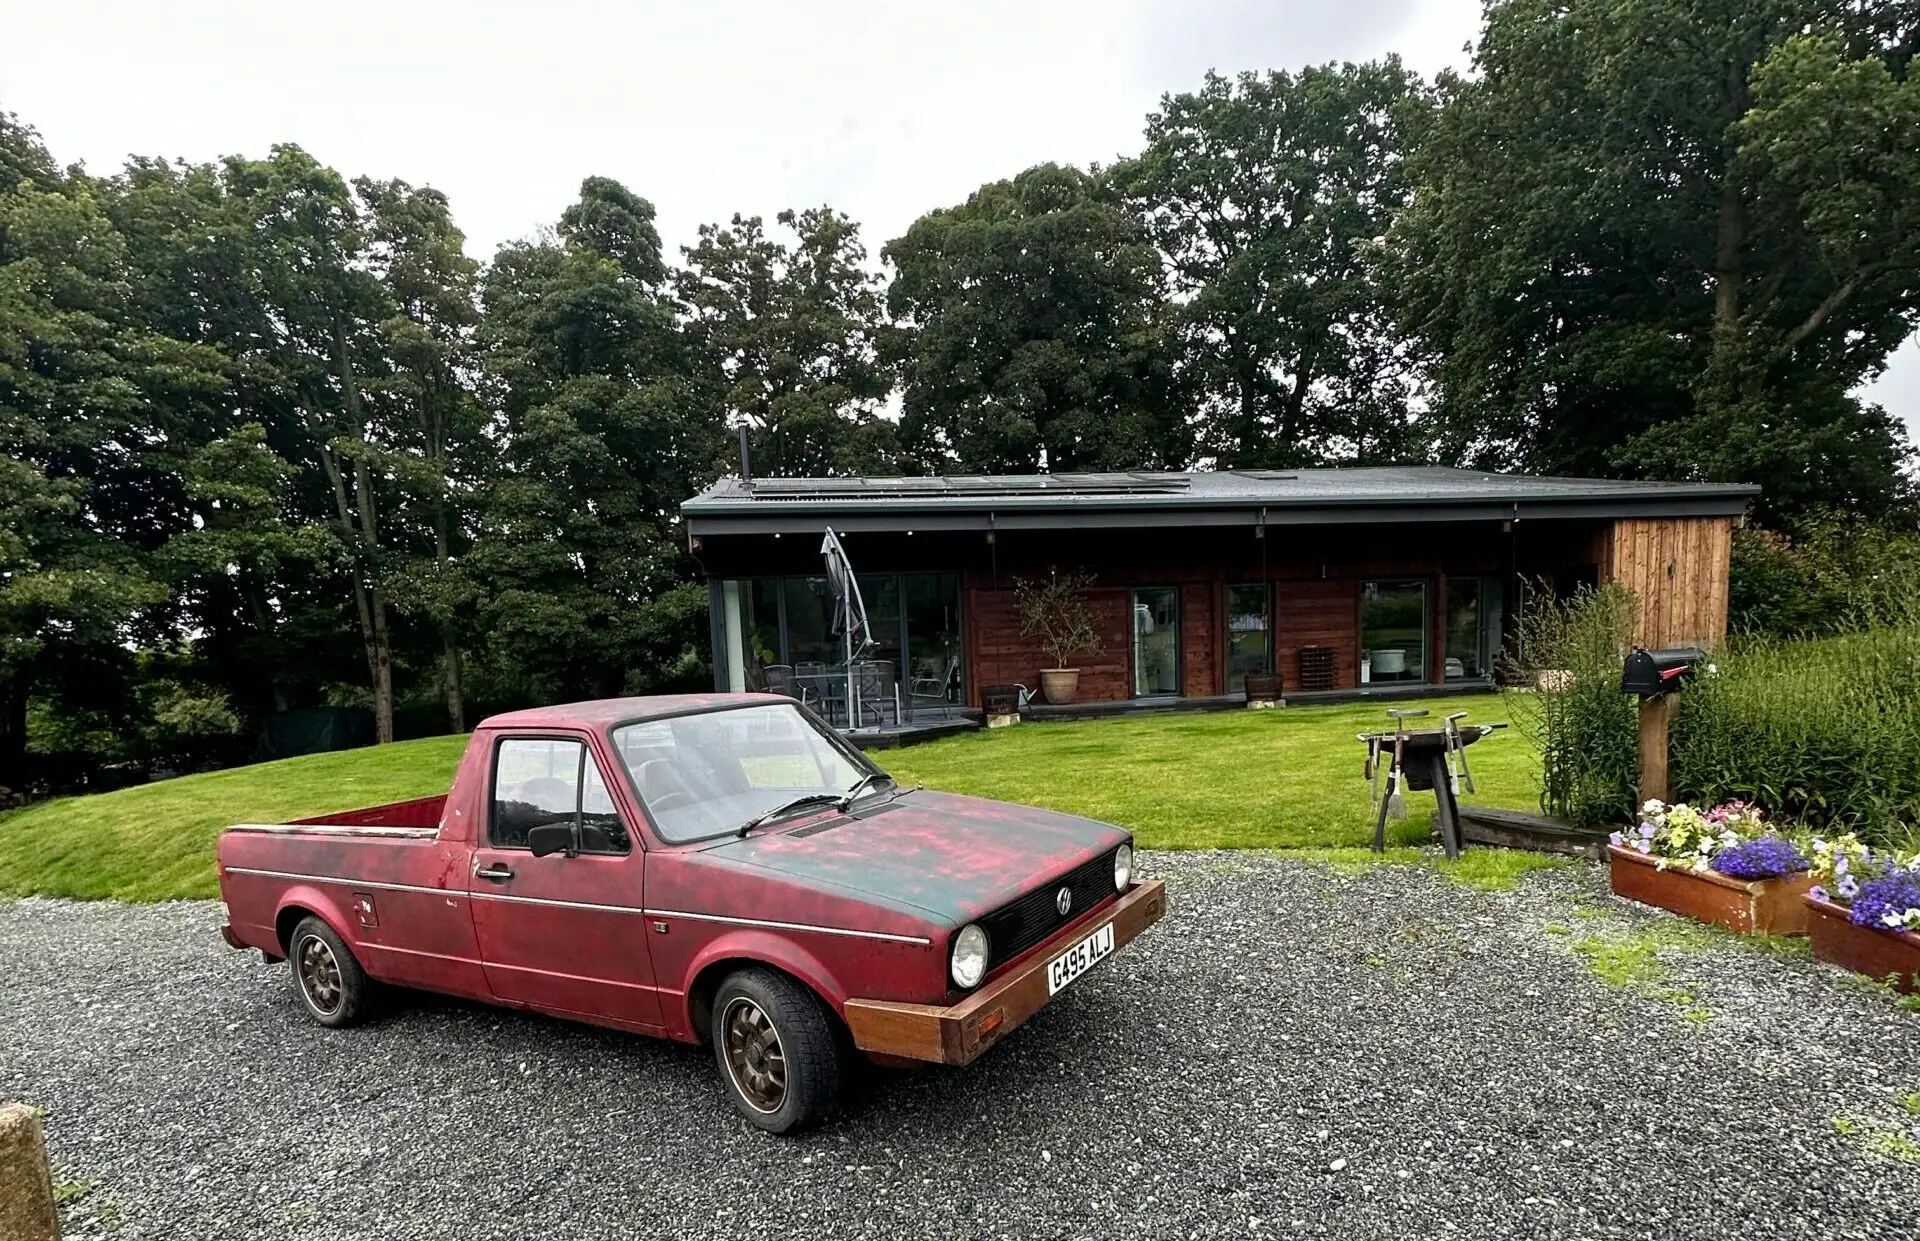 Unit-11 Chronicles: The Revival of a 1989 Volkswagen MK1 VW Caddy